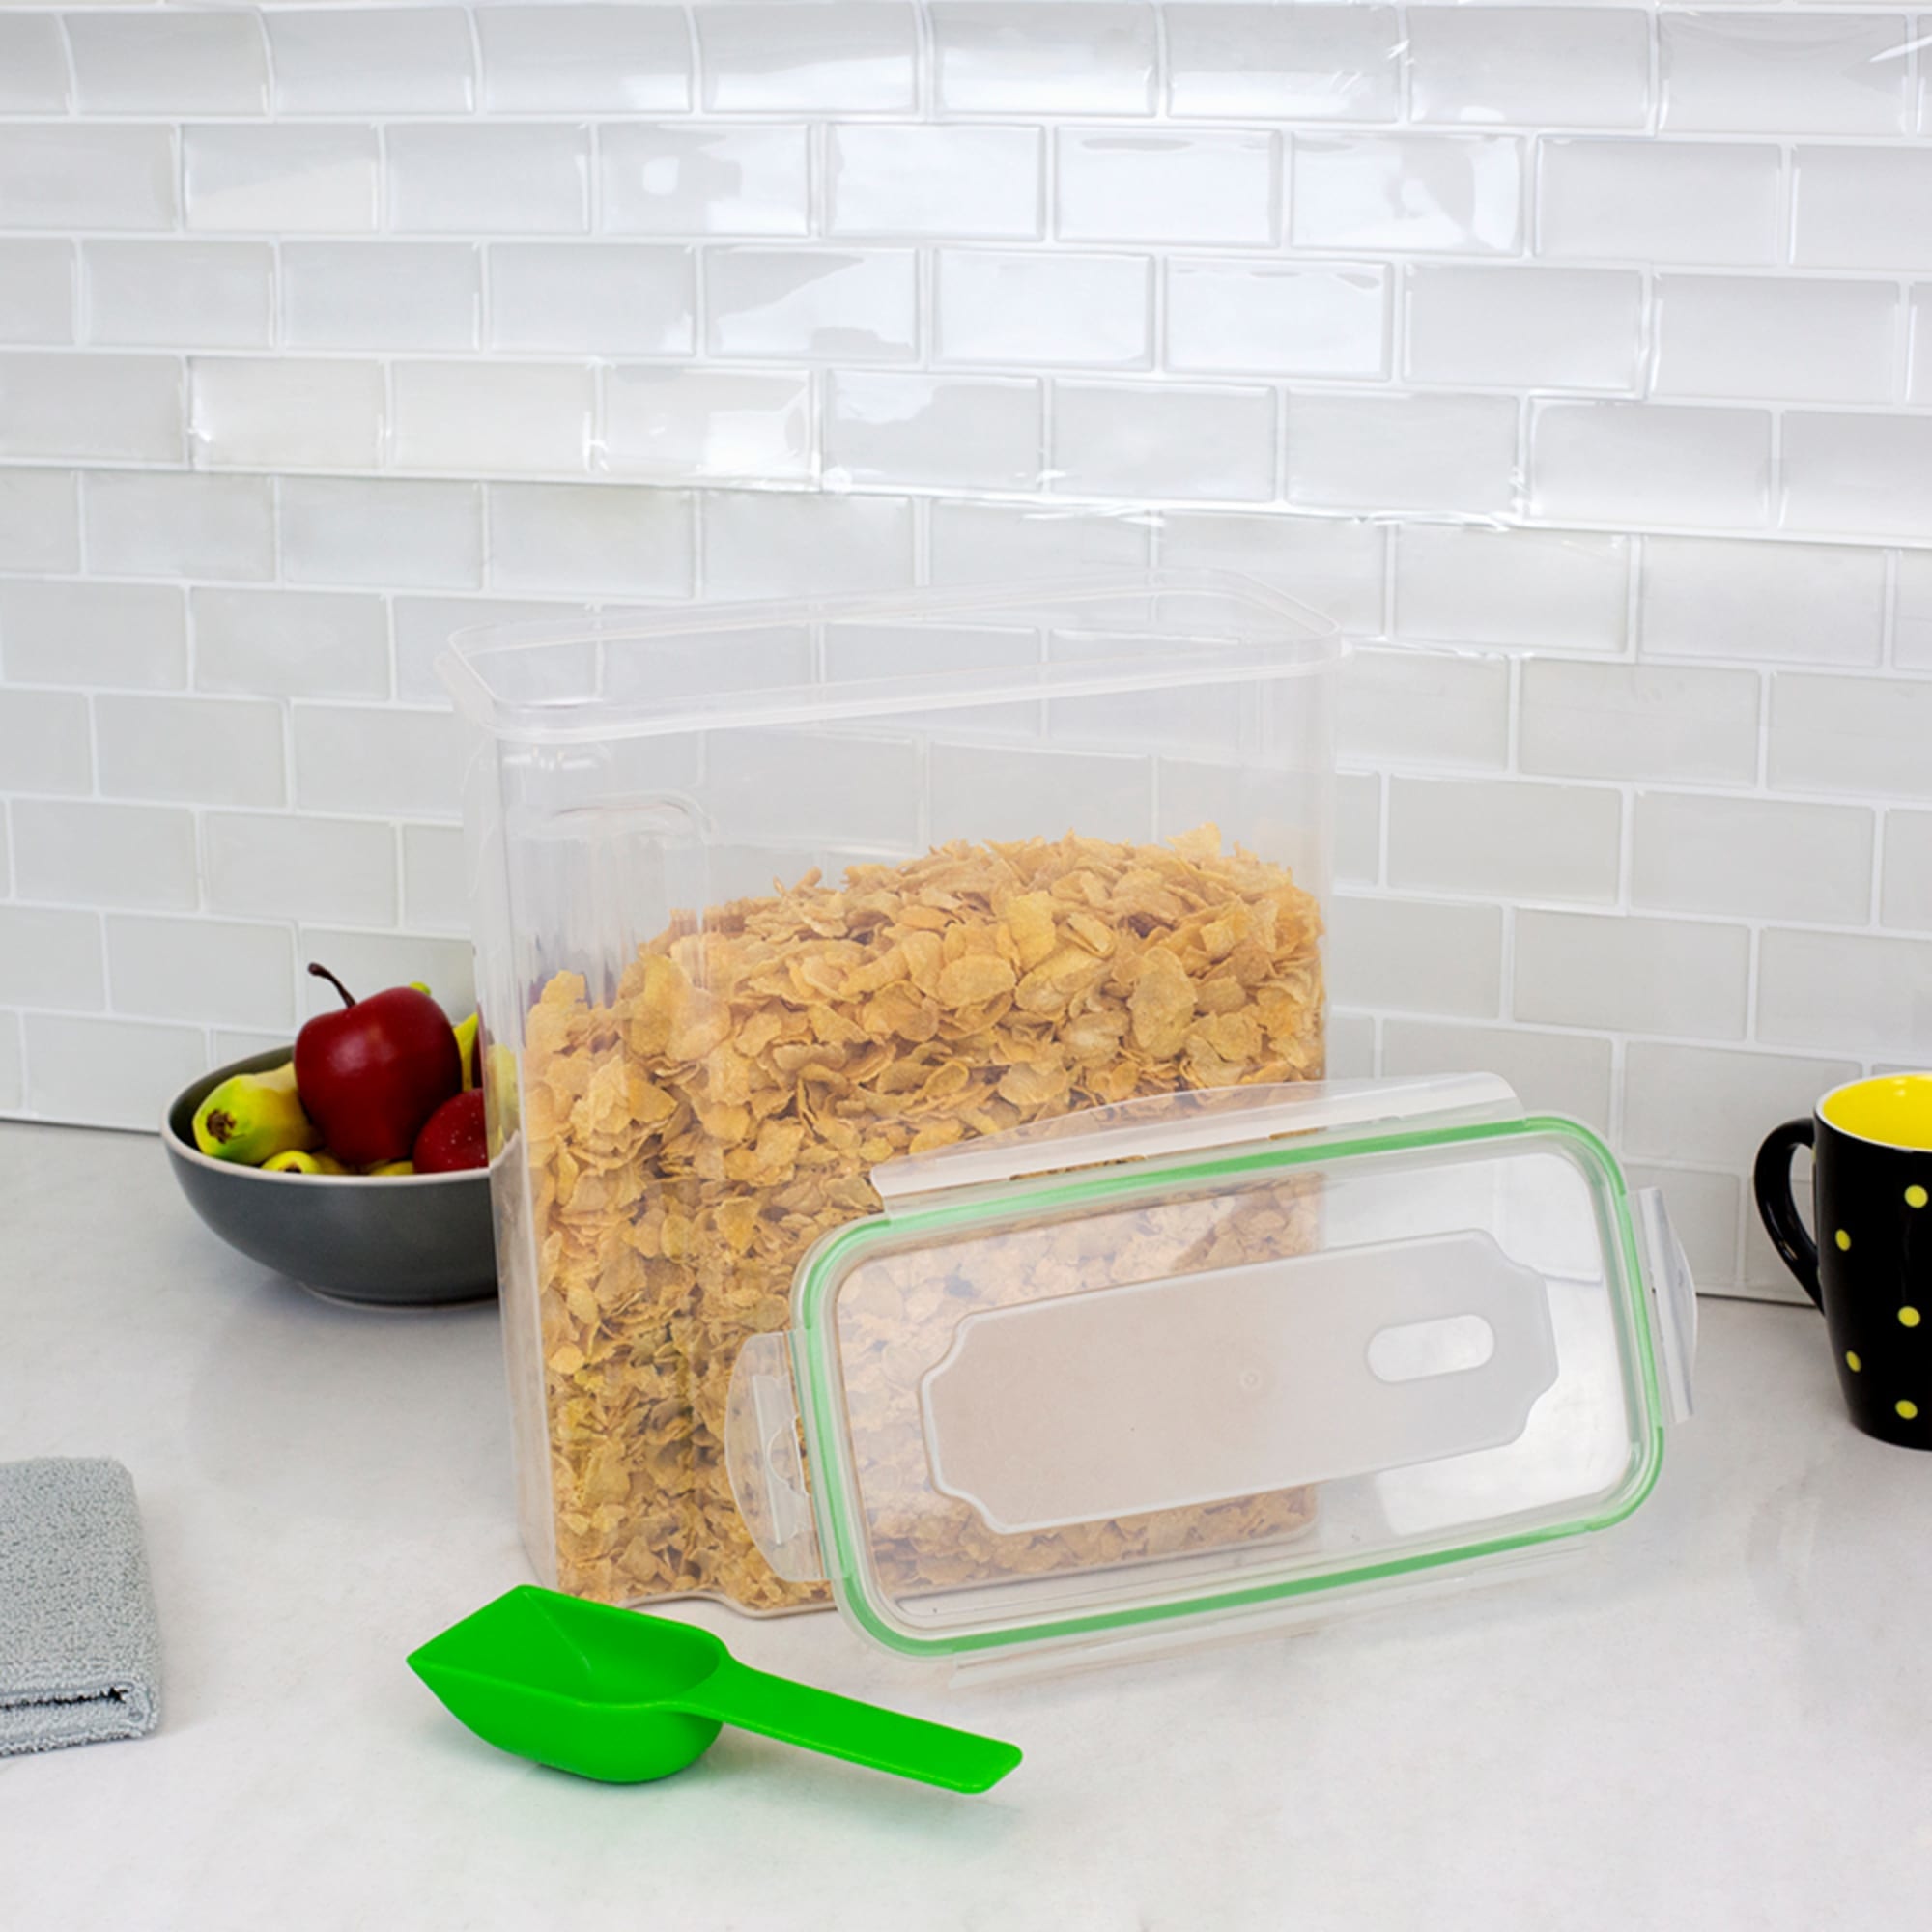 Home Basics 4-Sided Locking Plastic Cereal Storage Container with